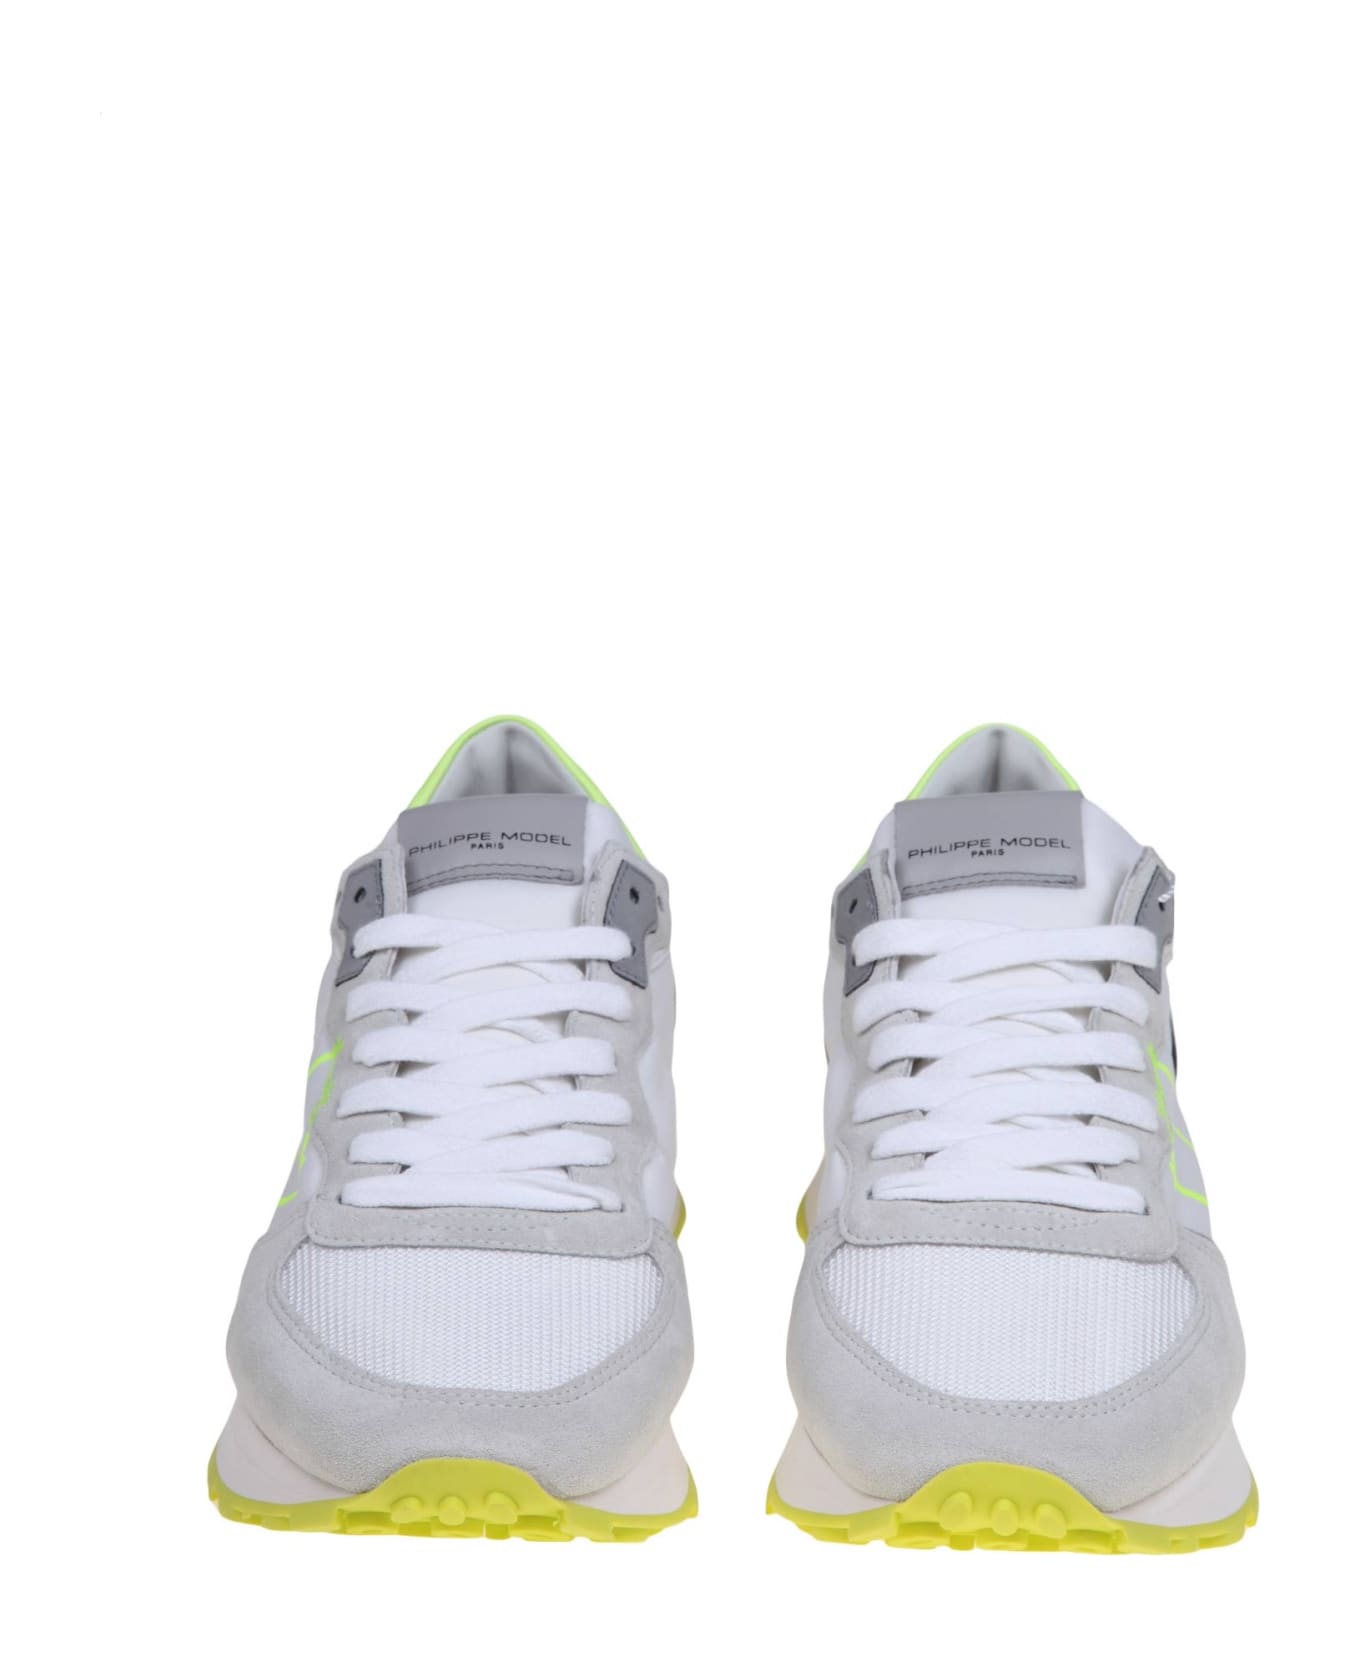 Philippe Model Tropez Haute Low Sneakers In Suede And Nylon Color White And Yellow - Blanc/Jaune